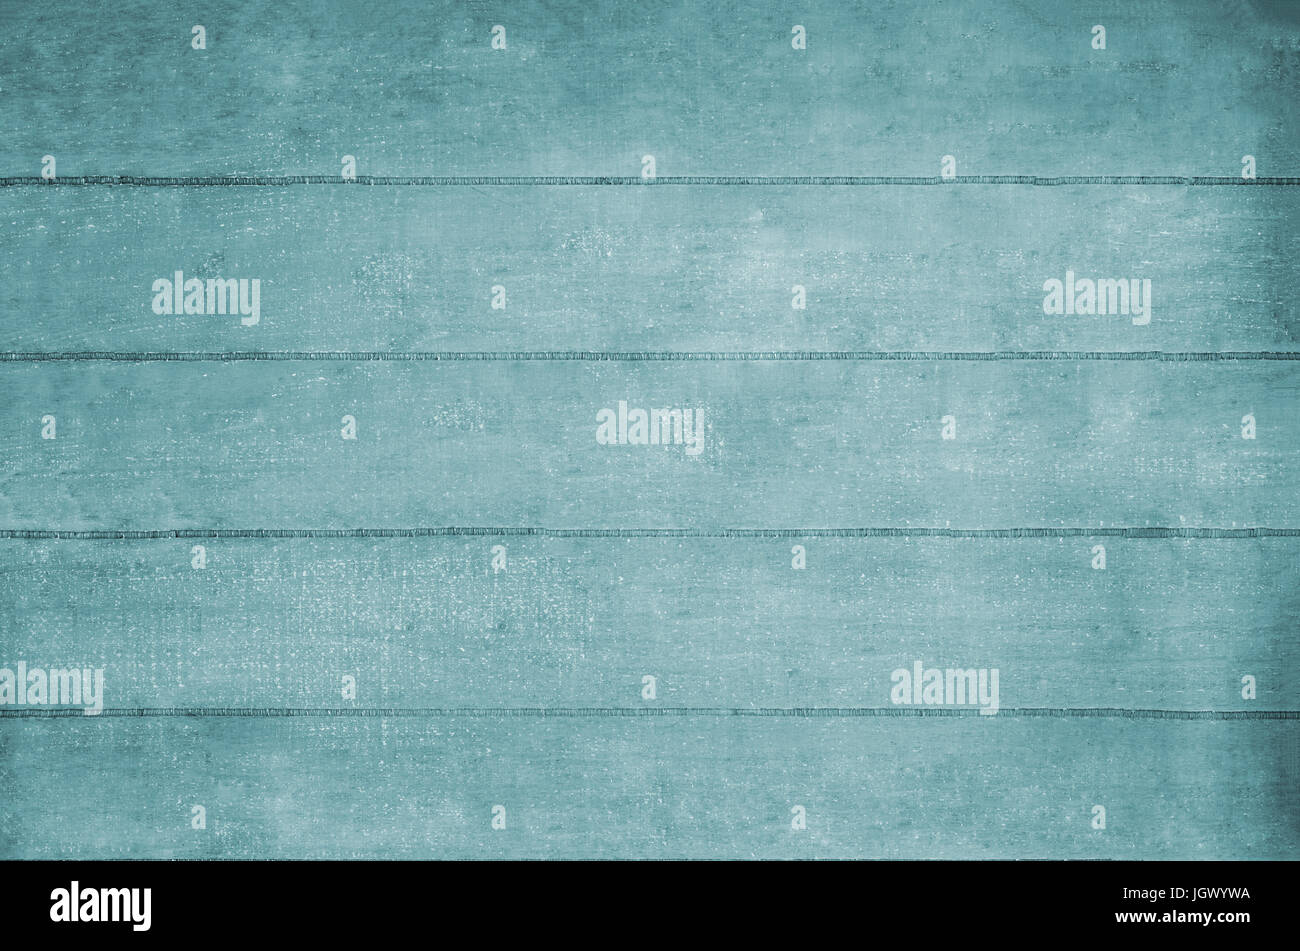 Wooden plank background texture in pale blue hues. Stock Photo